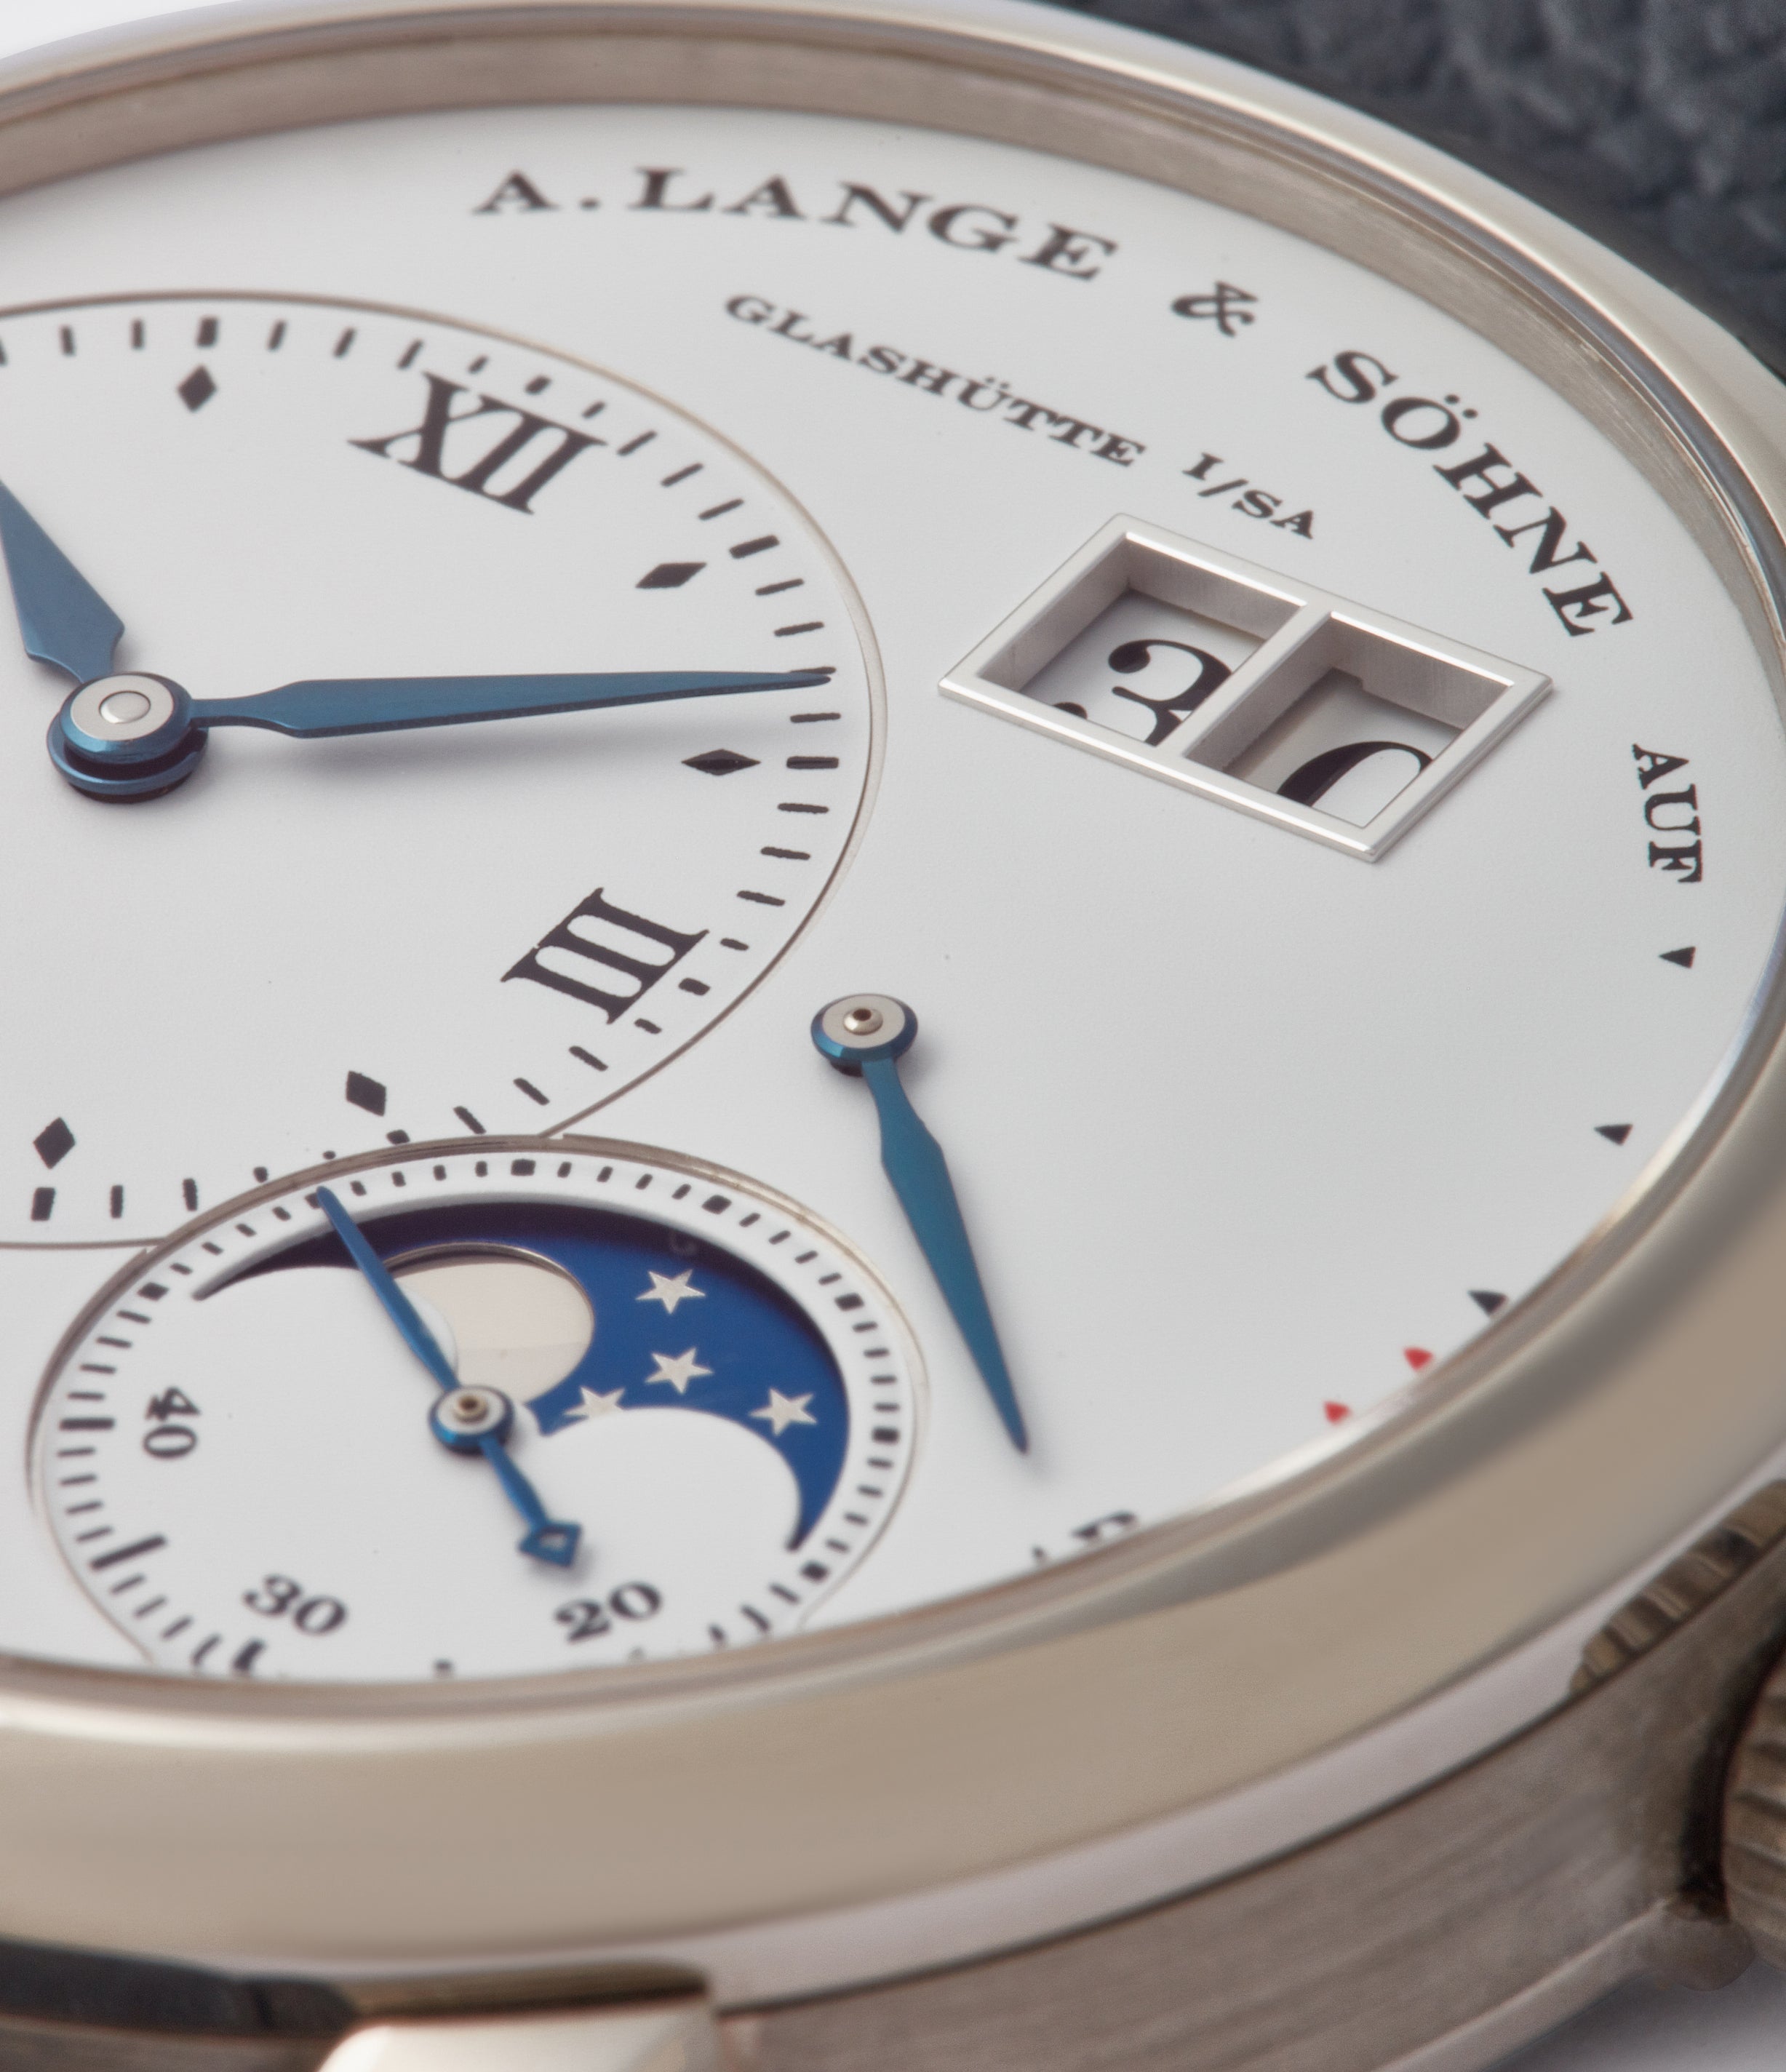 Buy pre-owned A. Lange & Sohne Lange 1 Limited Edition of 30 watches ...